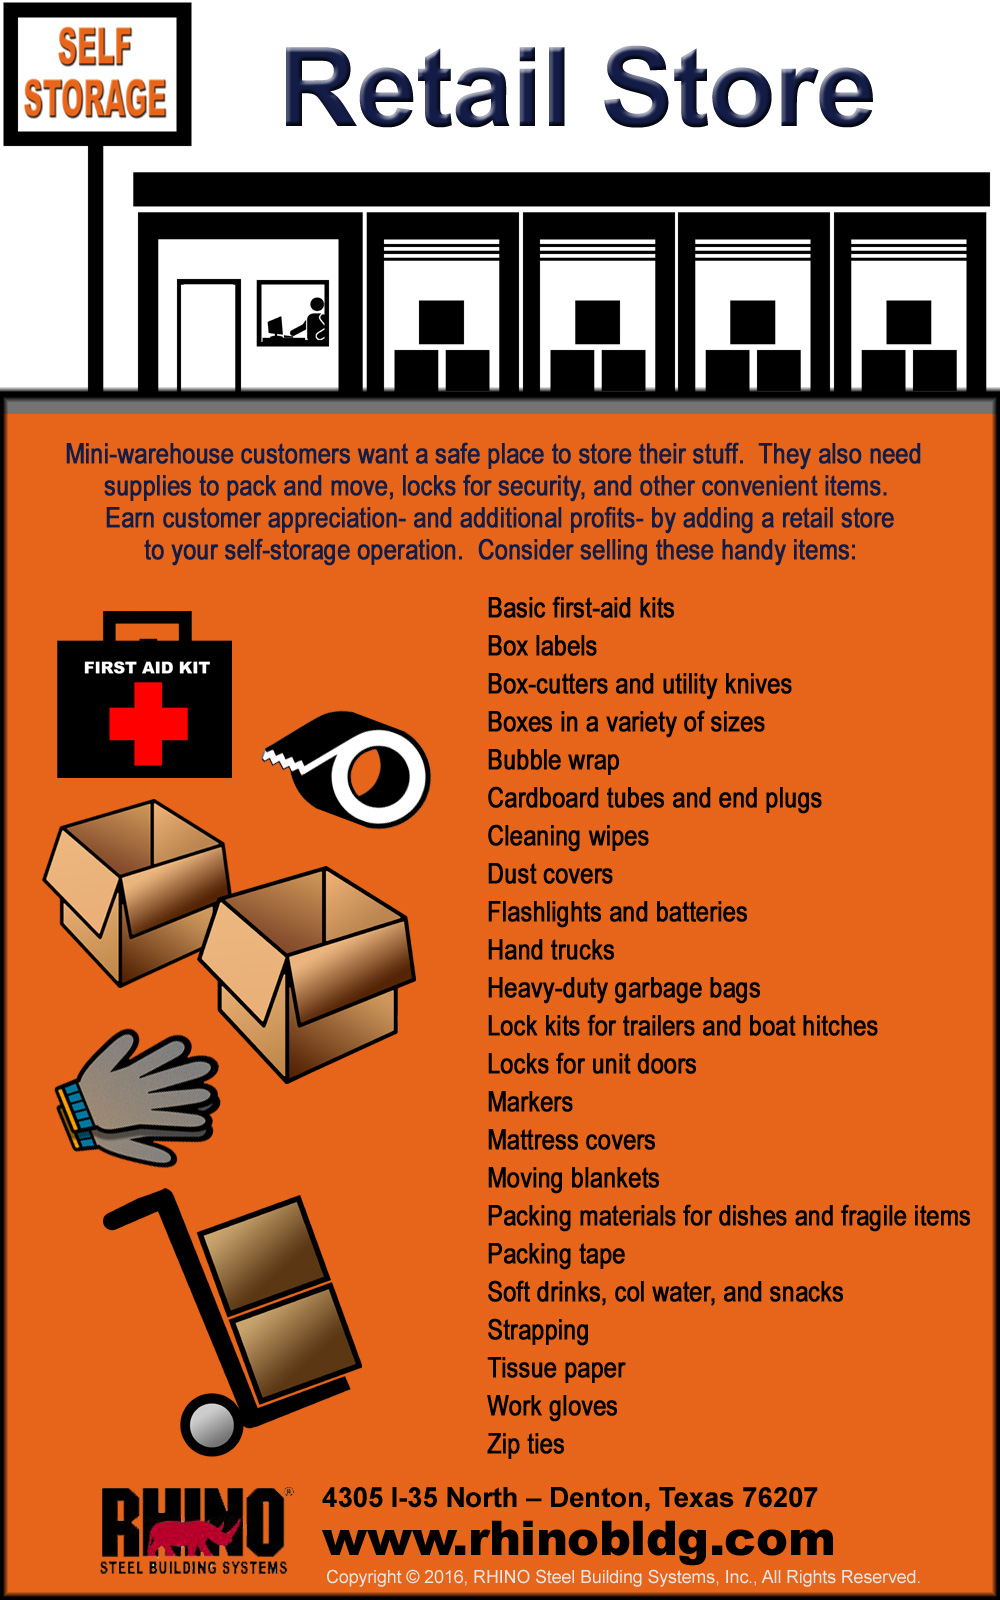 Infographic describes the possibilities of adding a supply store to a self-storage business.